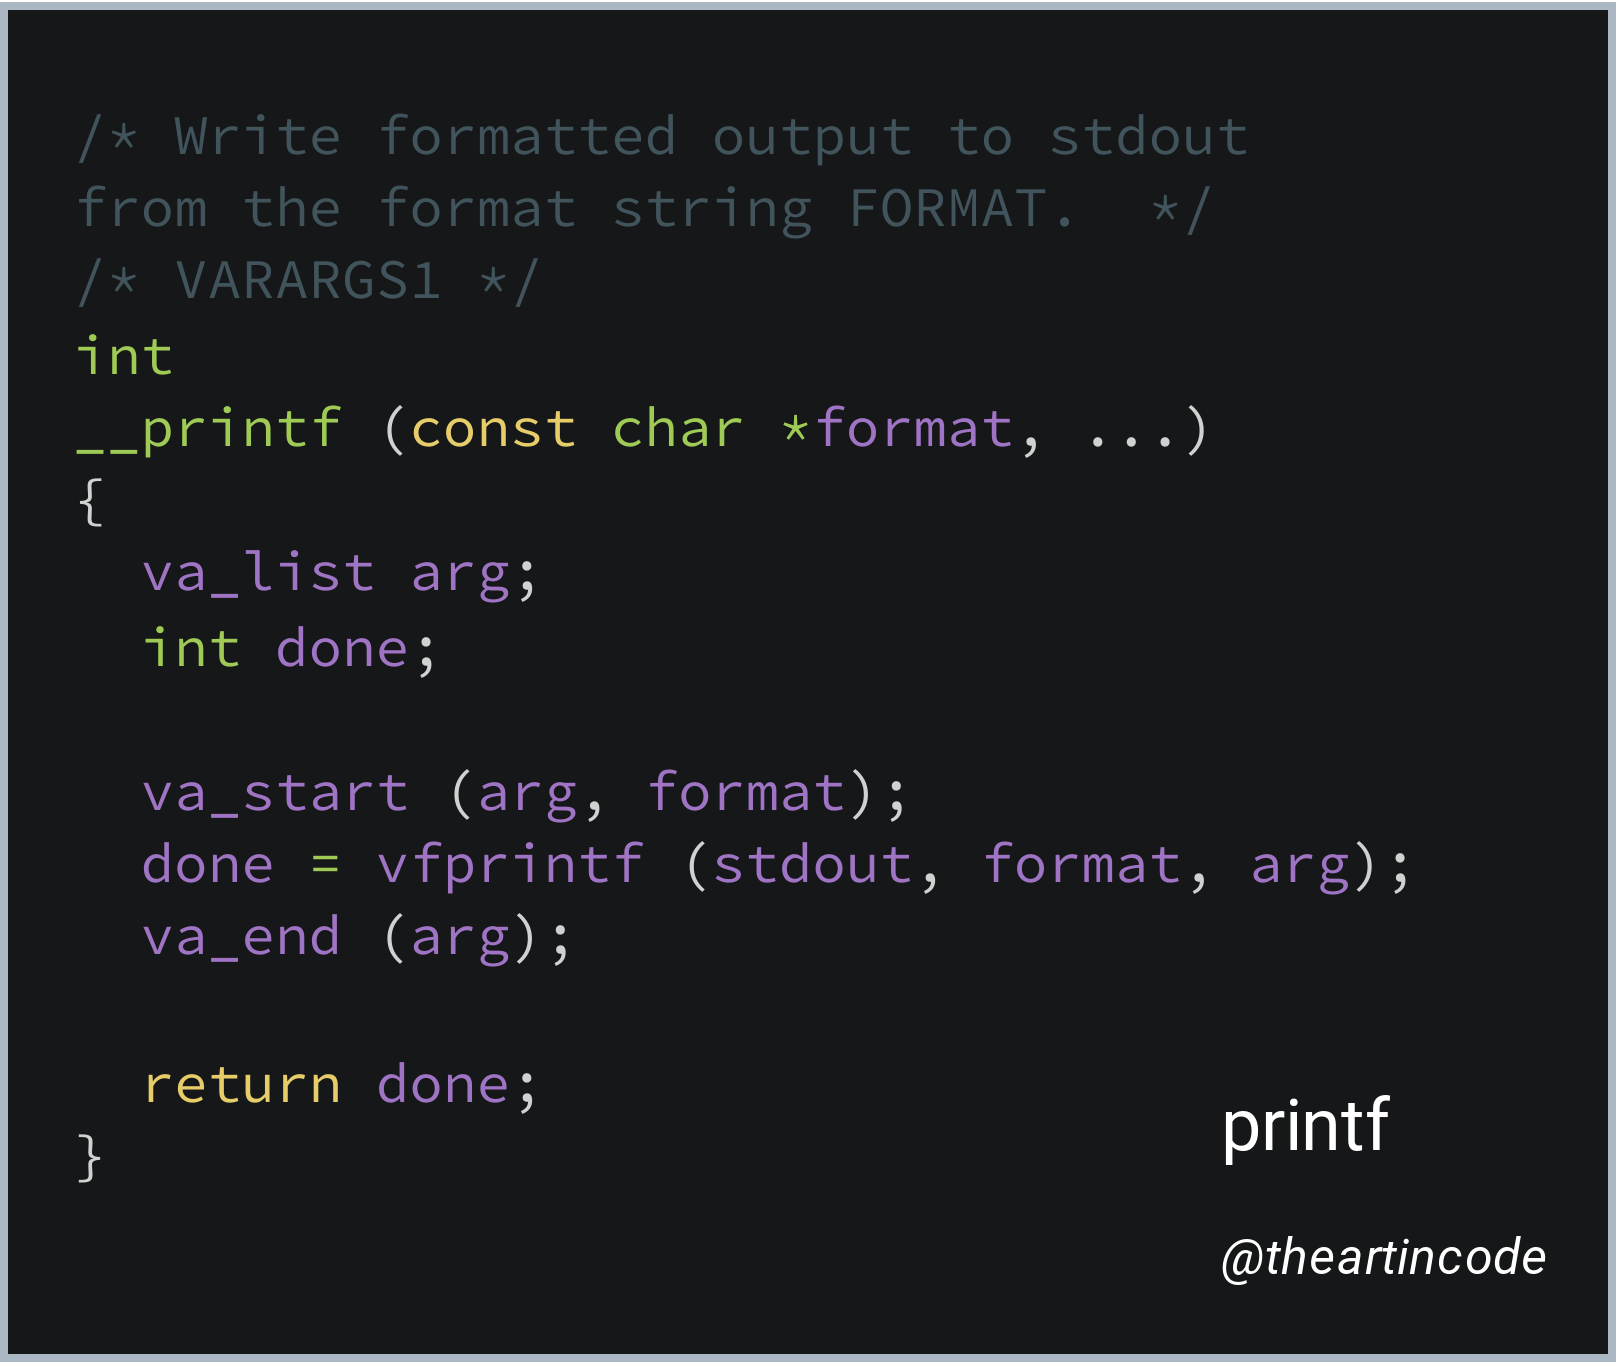 Code snippet of the printf function